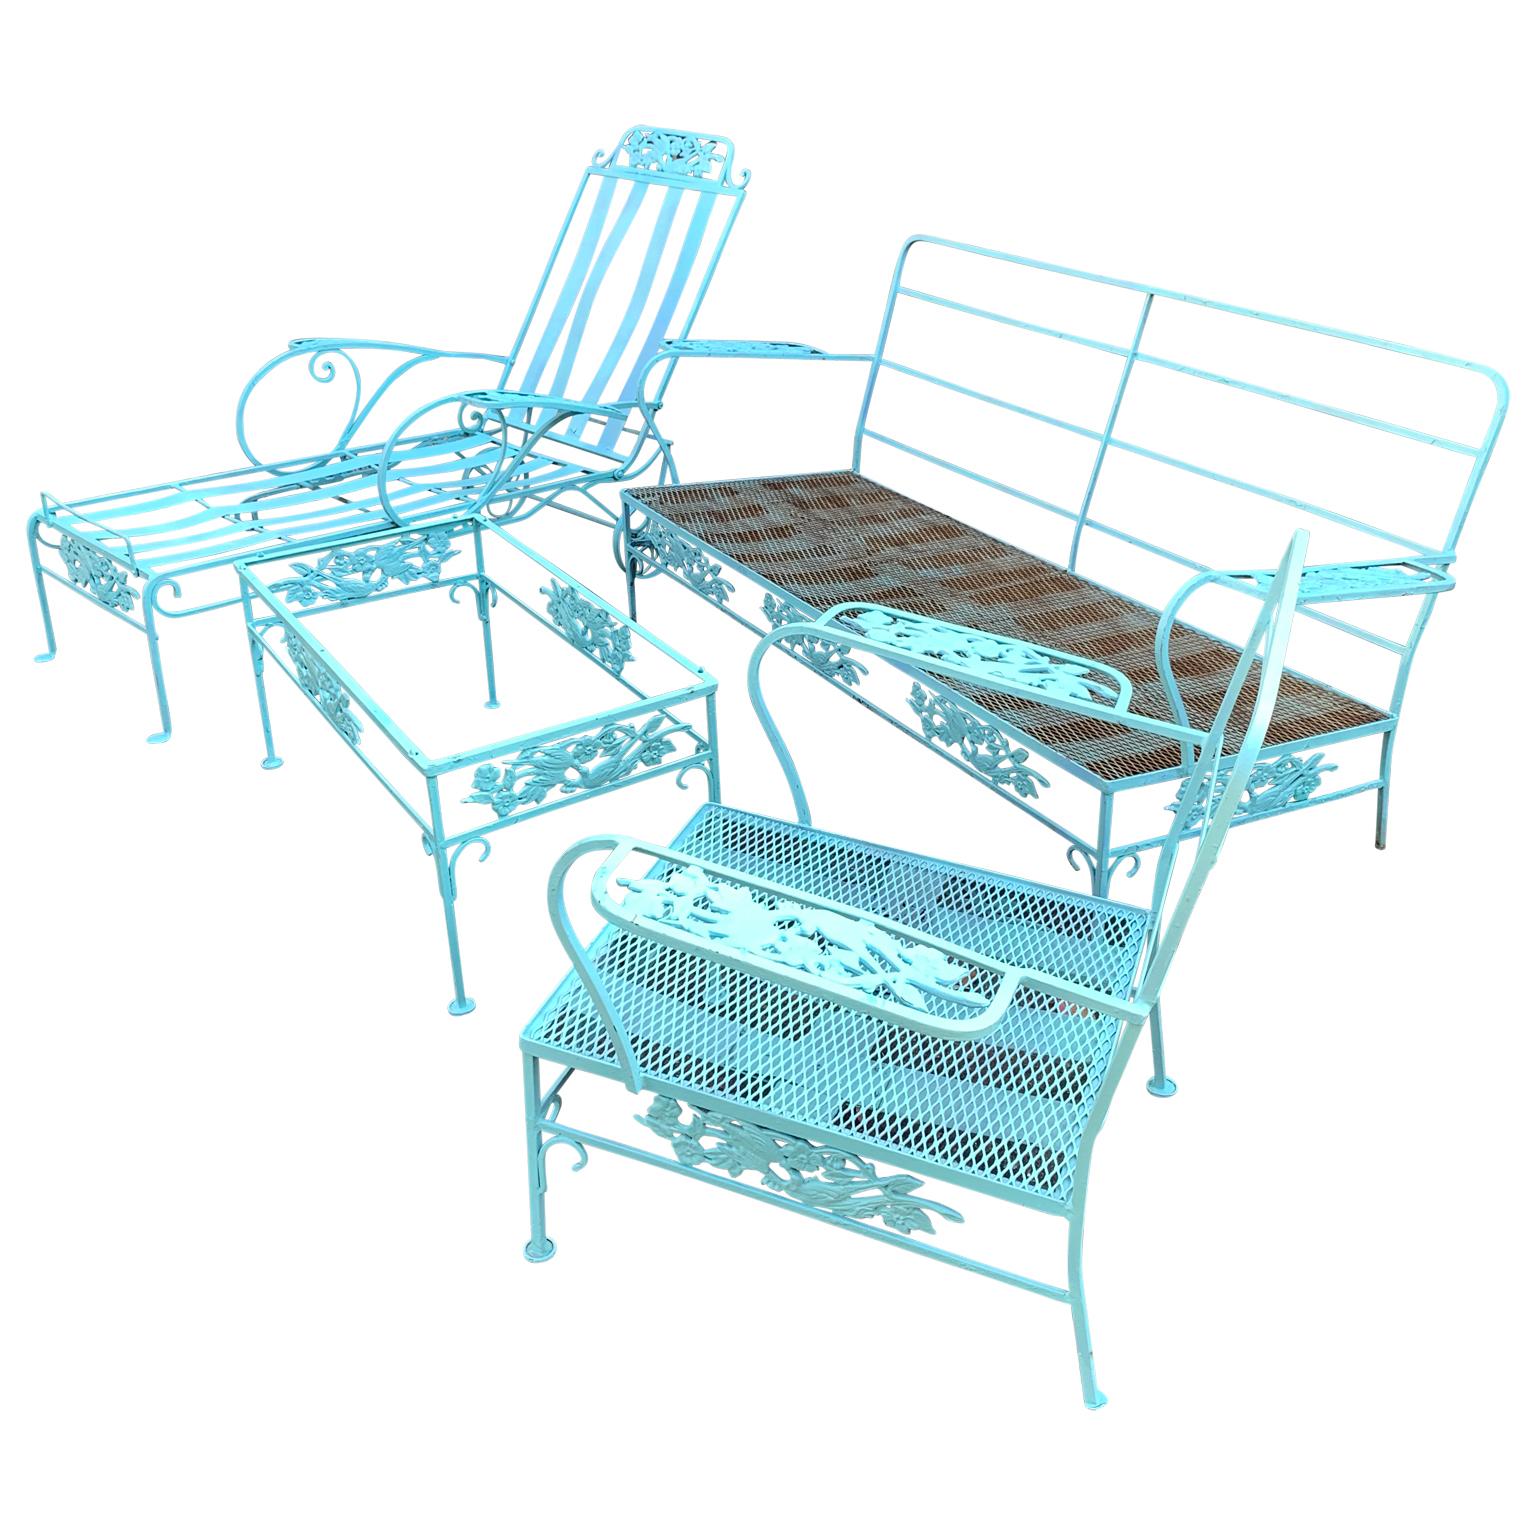 Turquoise painted iron garden patio cocktail table, lounge chair, two person sofa and armchair. This late Victorian set is featuring scrolled iron corners that conjoin and taper ending with flat round feet. The frieze is decorated with birds and